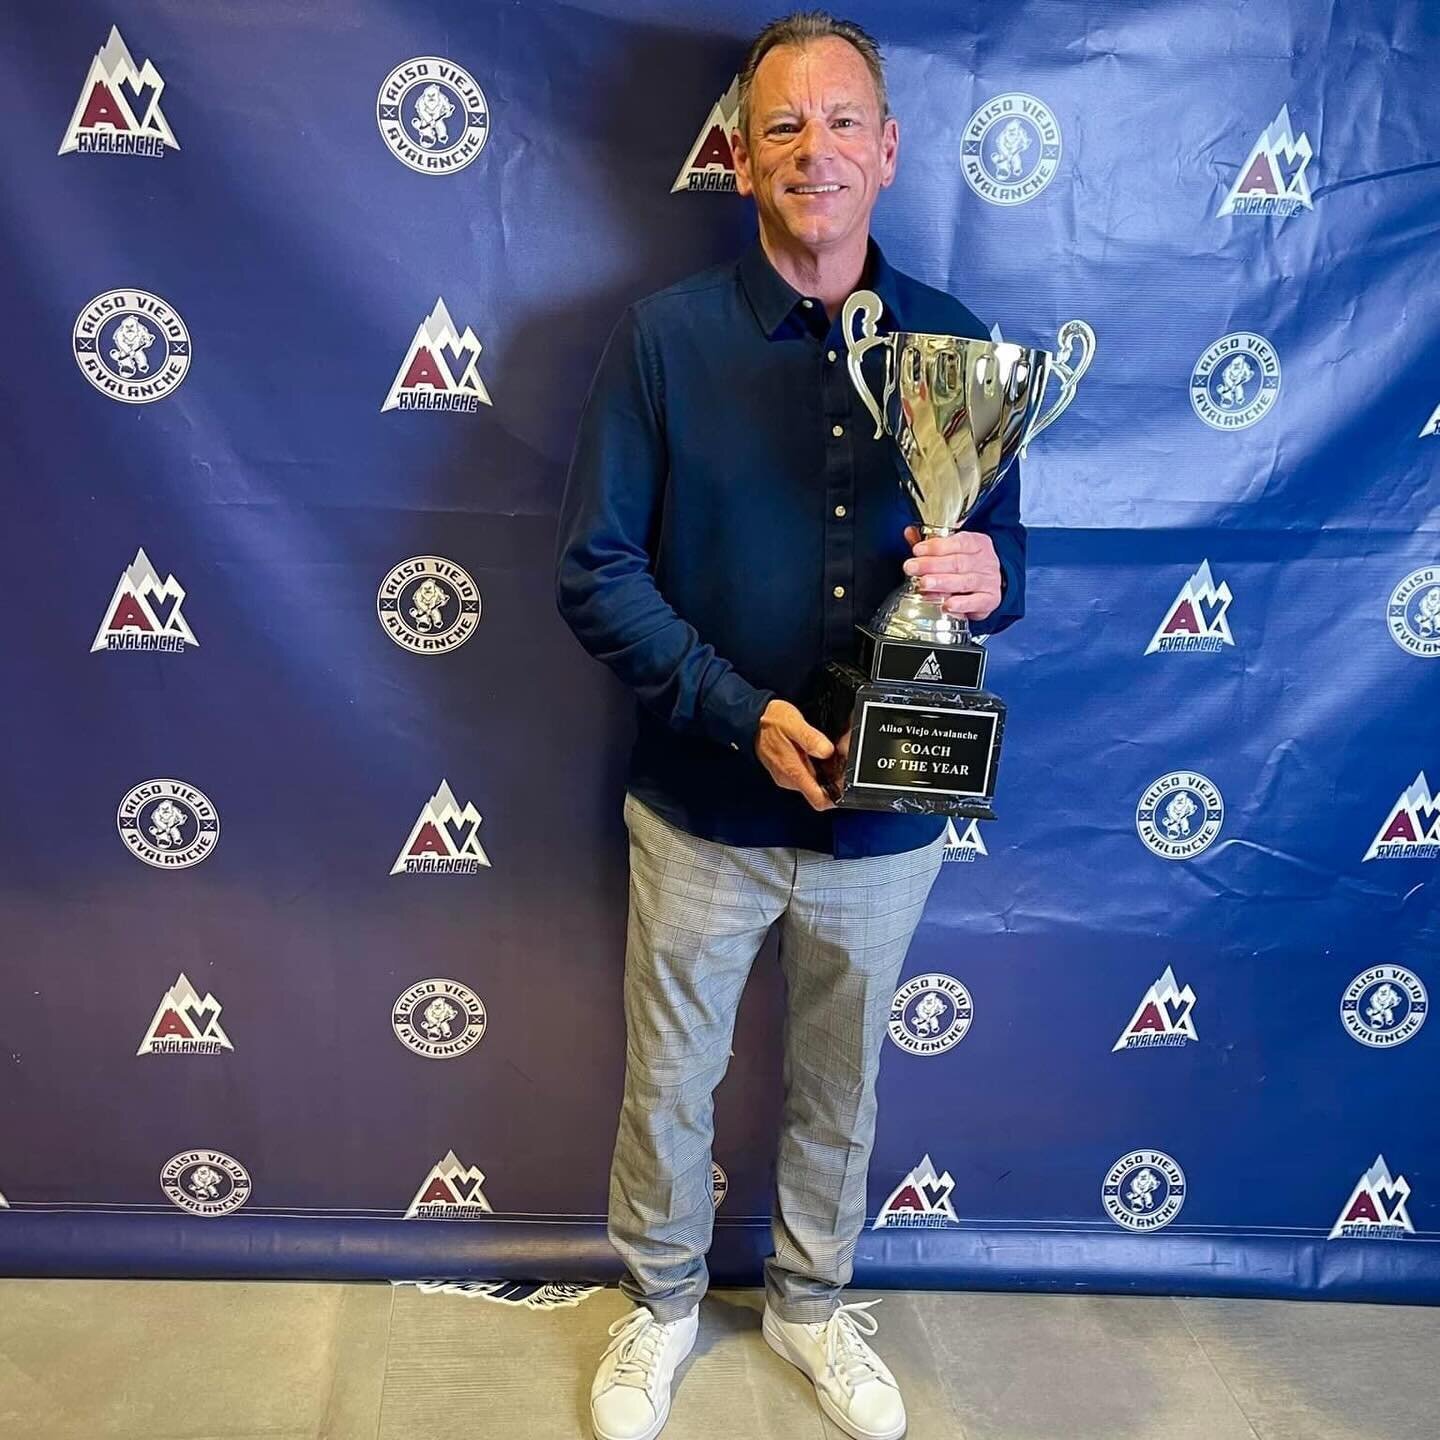 Congratulations to Coach Bob Walsh, the Avalanche 2023/2024 season Coach of the Year!

&ldquo;I was very honored to receive the &ldquo;Coach of the Year&rdquo;award from my peers. I started my coaching career 28 years ago at the Aliso Viejo Ice Palac